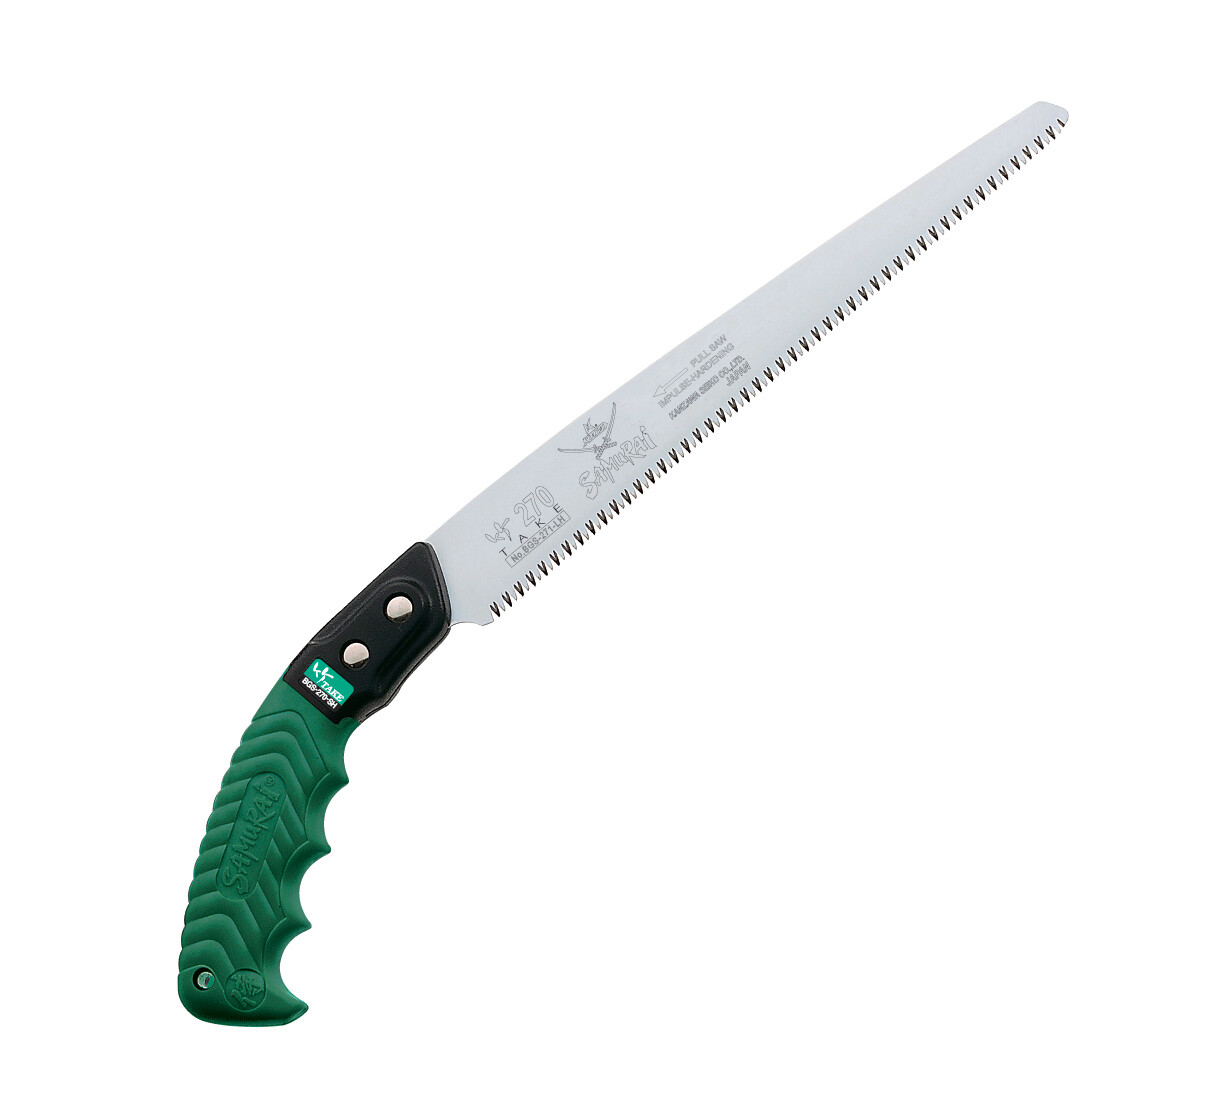 TAKE BGS-270-sf Straight saw in protective case